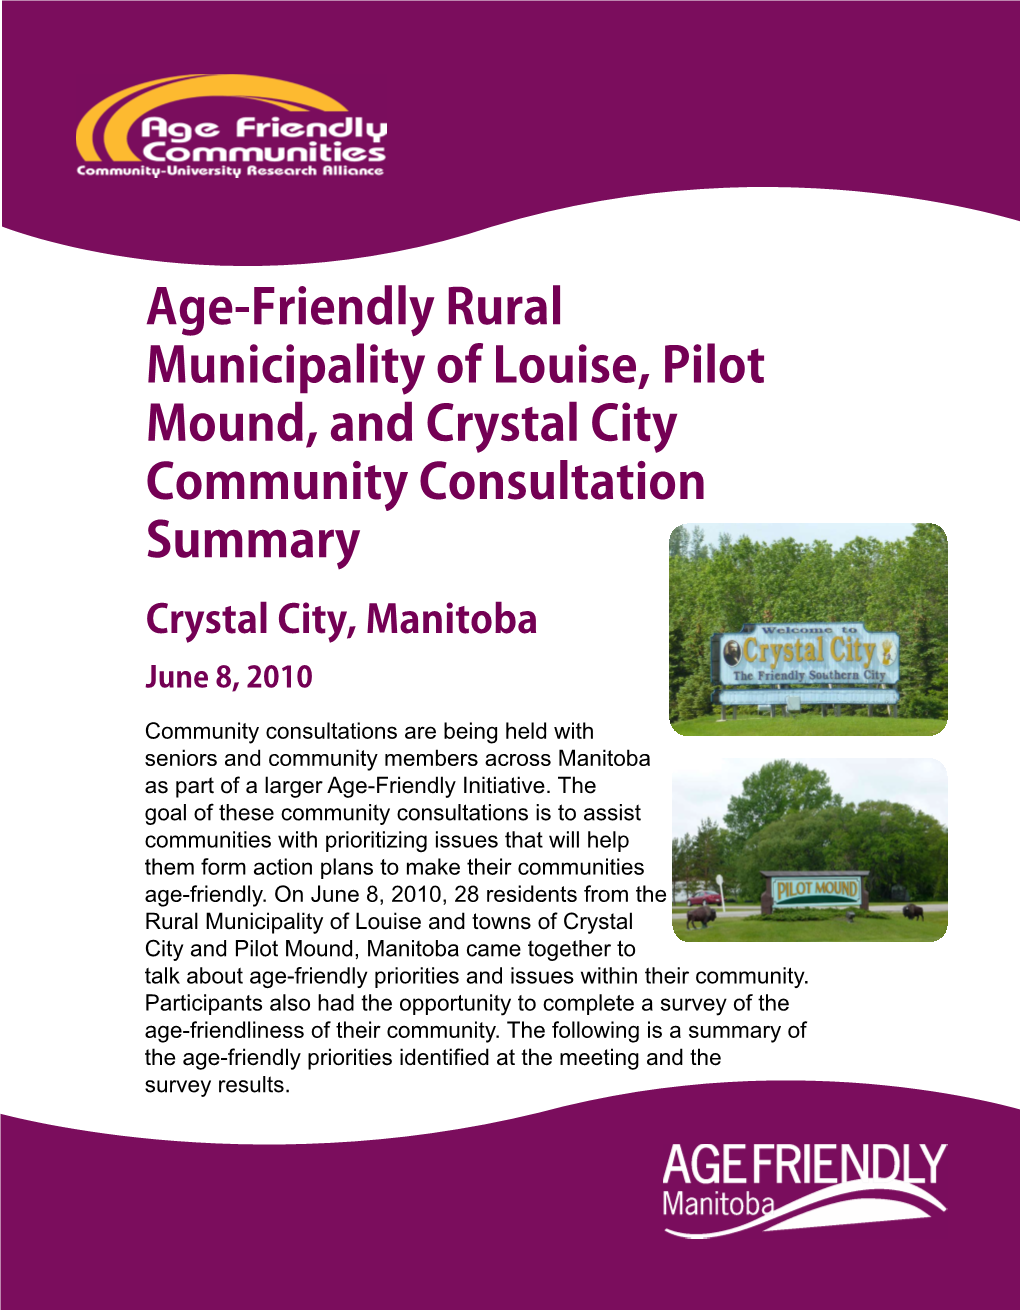 Age-Friendly Rural Municipality of Louise, Pilot Mound, and Crystal City Community Consultation Summary Crystal City, Manitoba June 8, 2010